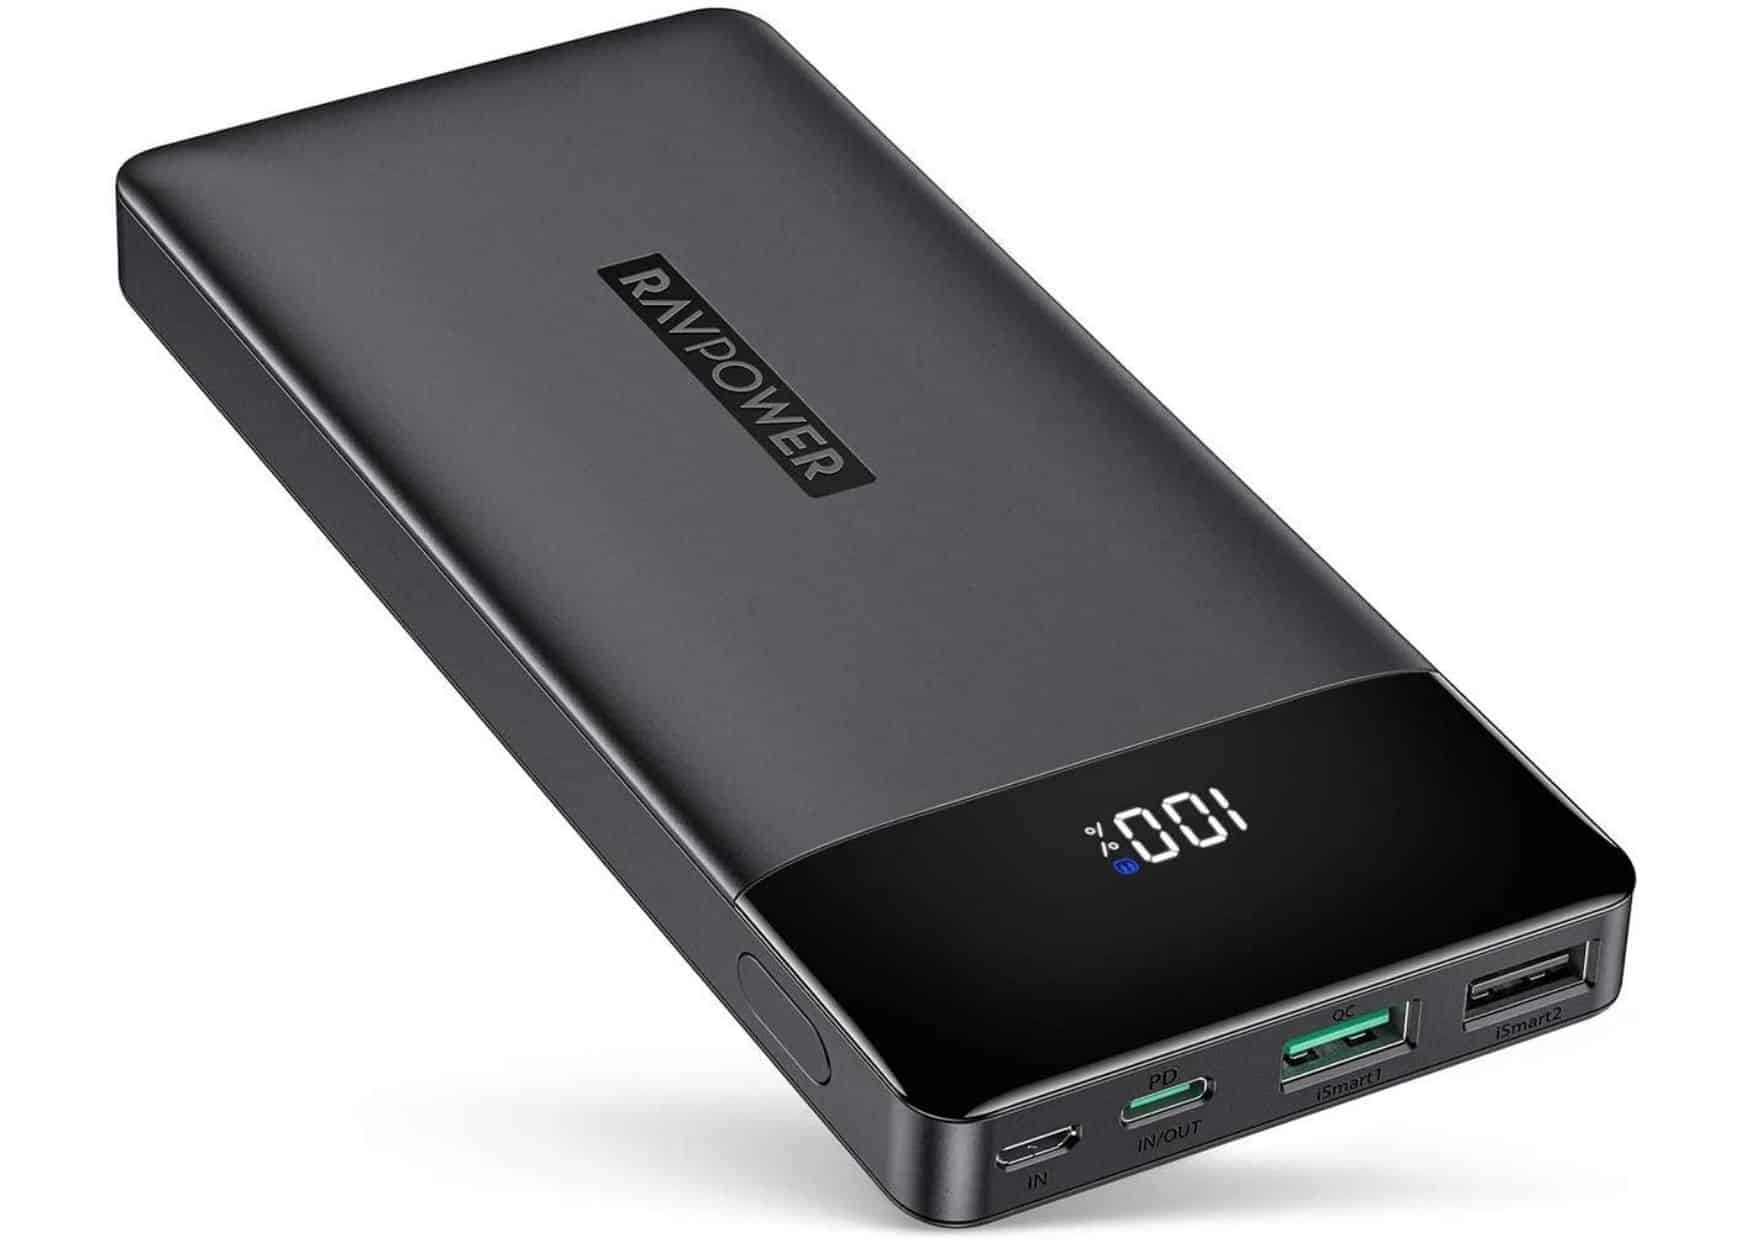 10 Best Power Banks to Top up Your Phone at Will on the Go